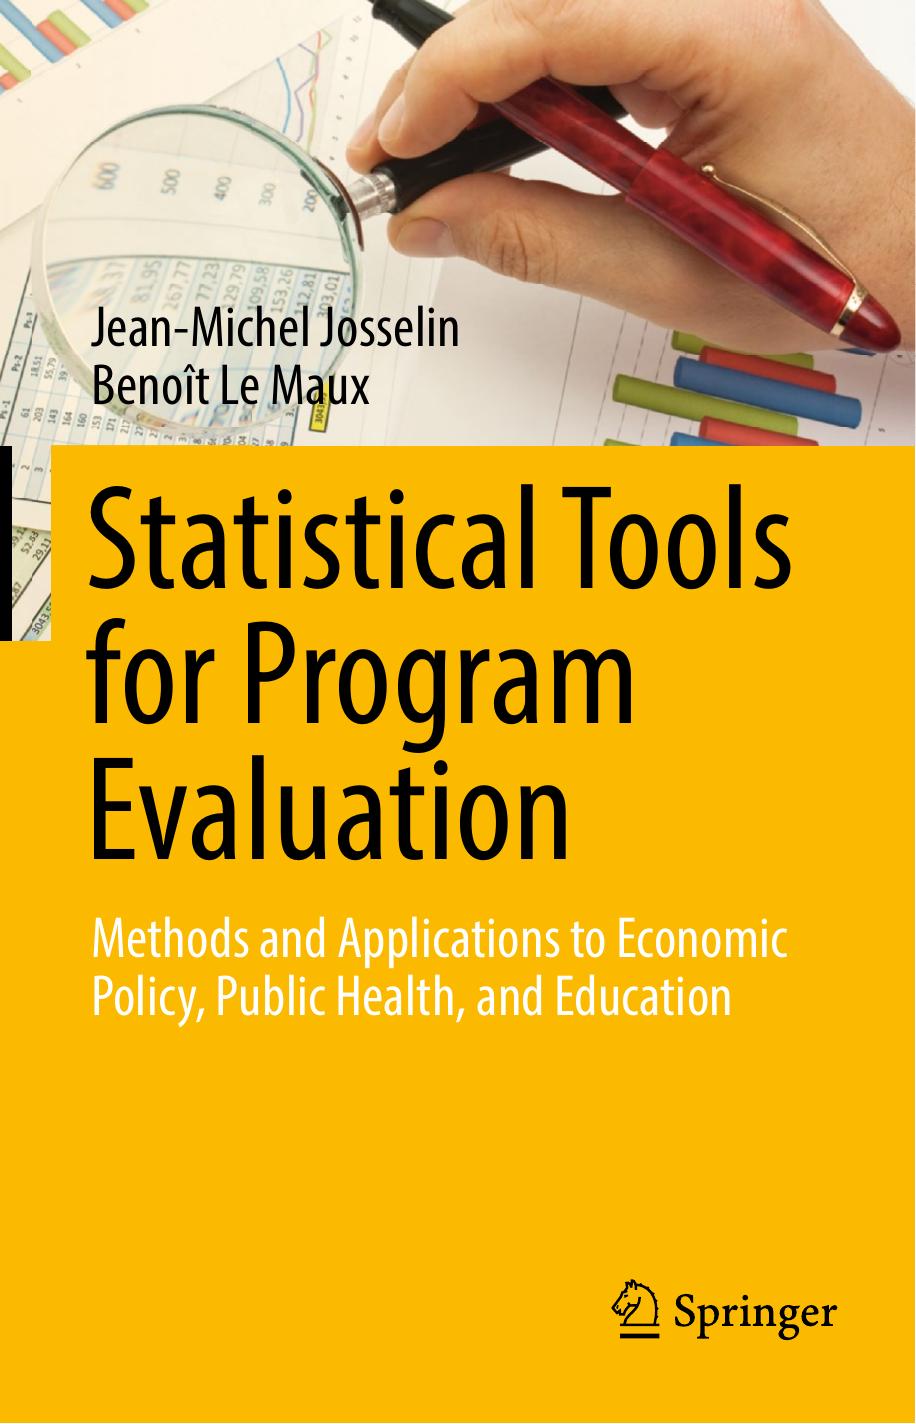 Statistical Tools for Program Evaluation   Methods and Applications 2017